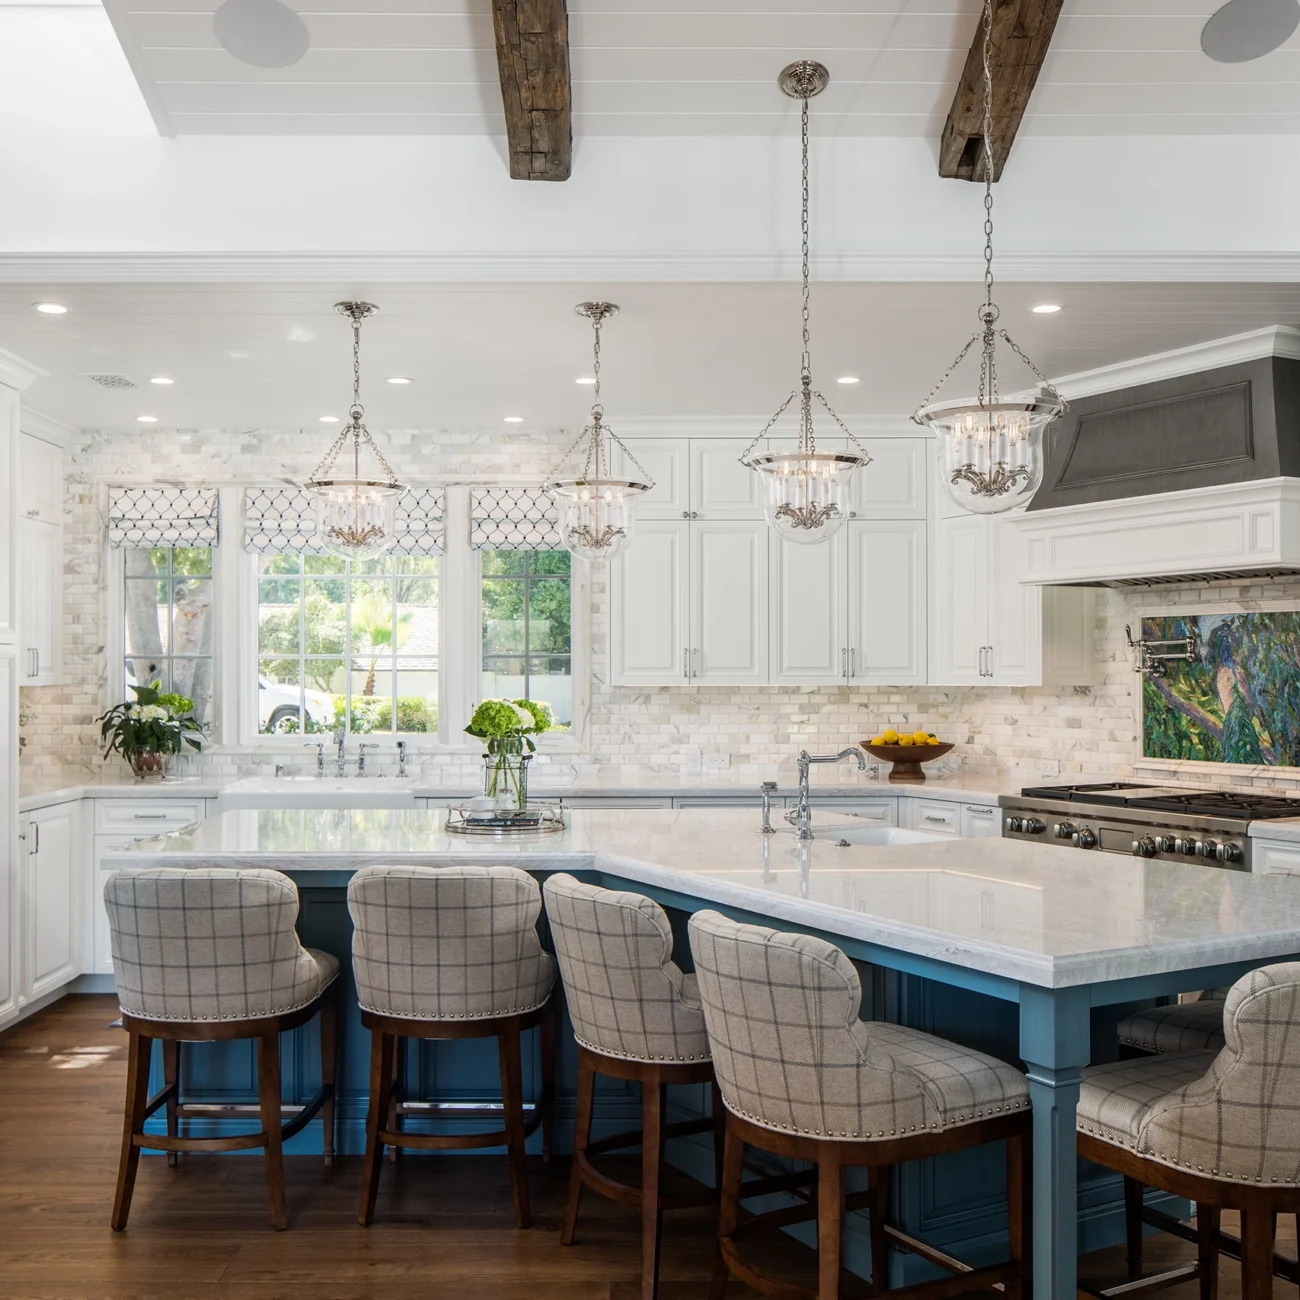 Christine Vroom Interiors Strawberry Lane | Traditional kitchen with plain bar seats, exposed beams, blue accent cabinets and hardwood flooring